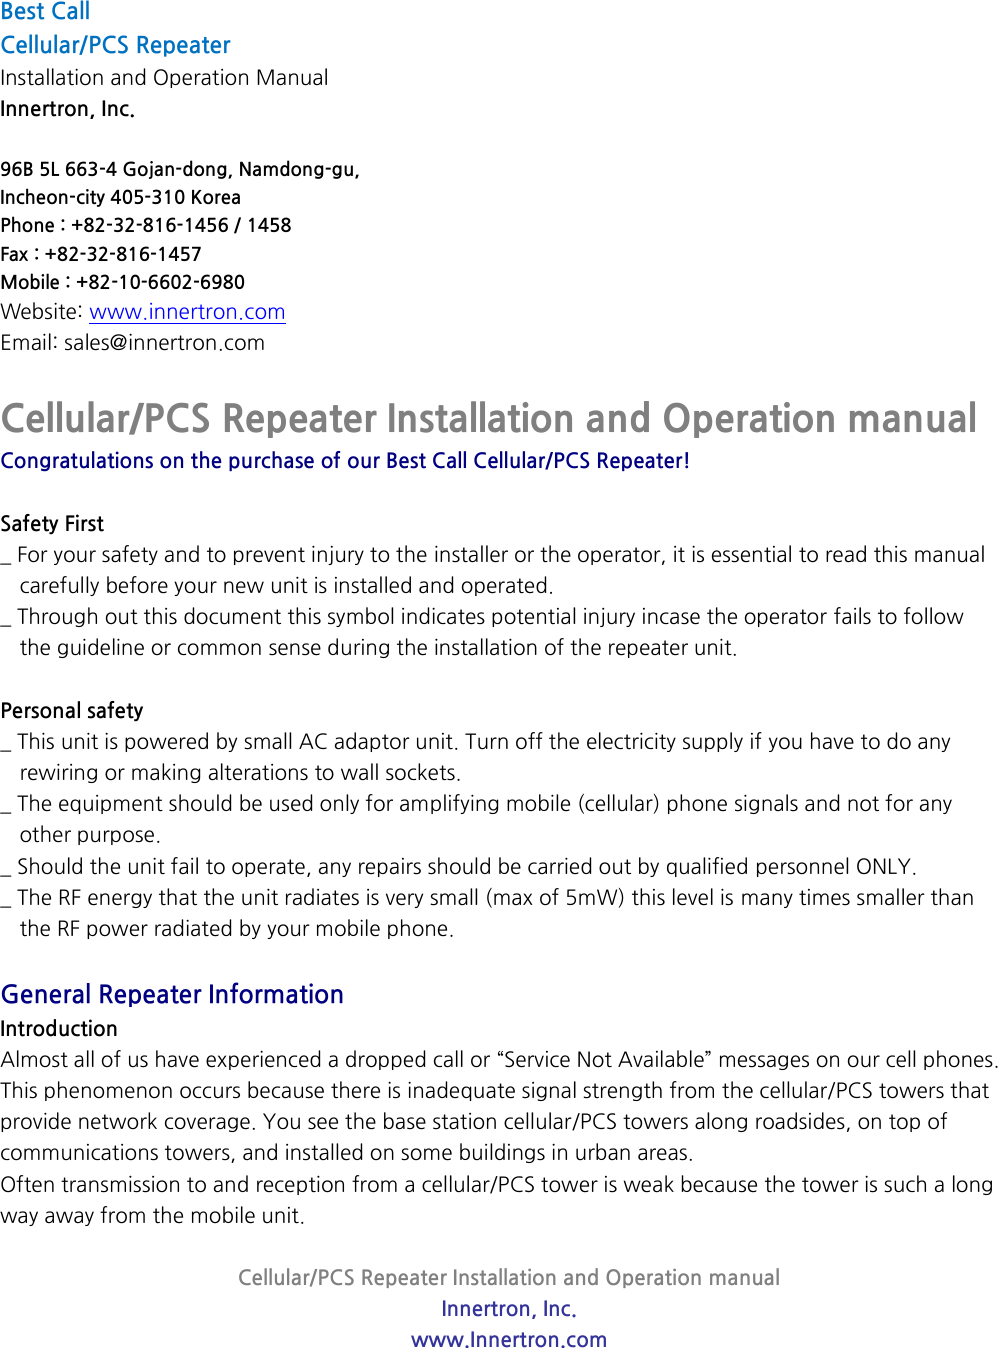 Cellular/PCS Repeater Installation and Operation manual Innertron, Inc. www.Innertron.com  Best Call   Cellular/PCS Repeater Installation and Operation Manual Innertron, Inc.  96B 5L 663-4 Gojan-dong, Namdong-gu, Incheon-city 405-310 Korea Phone : +82-32-816-1456 / 1458 Fax : +82-32-816-1457 Mobile : +82-10-6602-6980 Website: www.innertron.com Email: sales@innertron.com  Cellular/PCS Repeater Installation and Operation manual Congratulations on the purchase of our Best Call Cellular/PCS Repeater!  Safety First _ For your safety and to prevent injury to the installer or the operator, it is essential to read this manual carefully before your new unit is installed and operated. _ Through out this document this symbol indicates potential injury incase the operator fails to follow   the guideline or common sense during the installation of the repeater unit.  Personal safety _ This unit is powered by small AC adaptor unit. Turn off the electricity supply if you have to do any   rewiring or making alterations to wall sockets. _ The equipment should be used only for amplifying mobile (cellular) phone signals and not for any   other purpose. _ Should the unit fail to operate, any repairs should be carried out by qualified personnel ONLY. _ The RF energy that the unit radiates is very small (max of 5mW) this level is many times smaller than   the RF power radiated by your mobile phone.  General Repeater Information Introduction Almost all of us have experienced a dropped call or “Service Not Available” messages on our cell phones. This phenomenon occurs because there is inadequate signal strength from the cellular/PCS towers that provide network coverage. You see the base station cellular/PCS towers along roadsides, on top of communications towers, and installed on some buildings in urban areas. Often transmission to and reception from a cellular/PCS tower is weak because the tower is such a long way away from the mobile unit.   